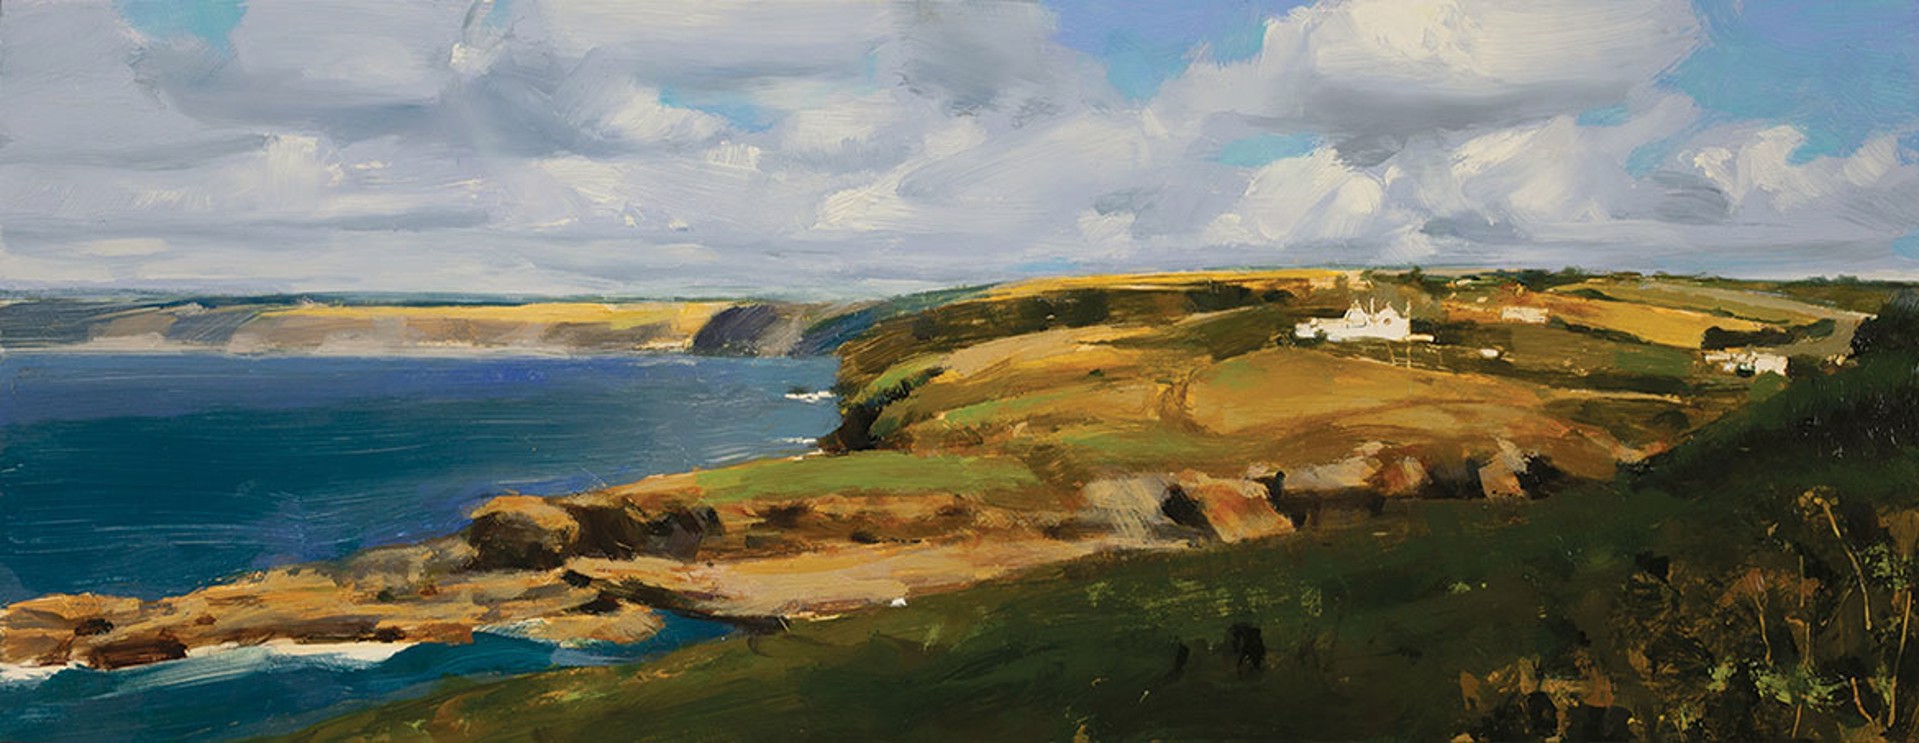 Isle of Wight by Ben Aronson